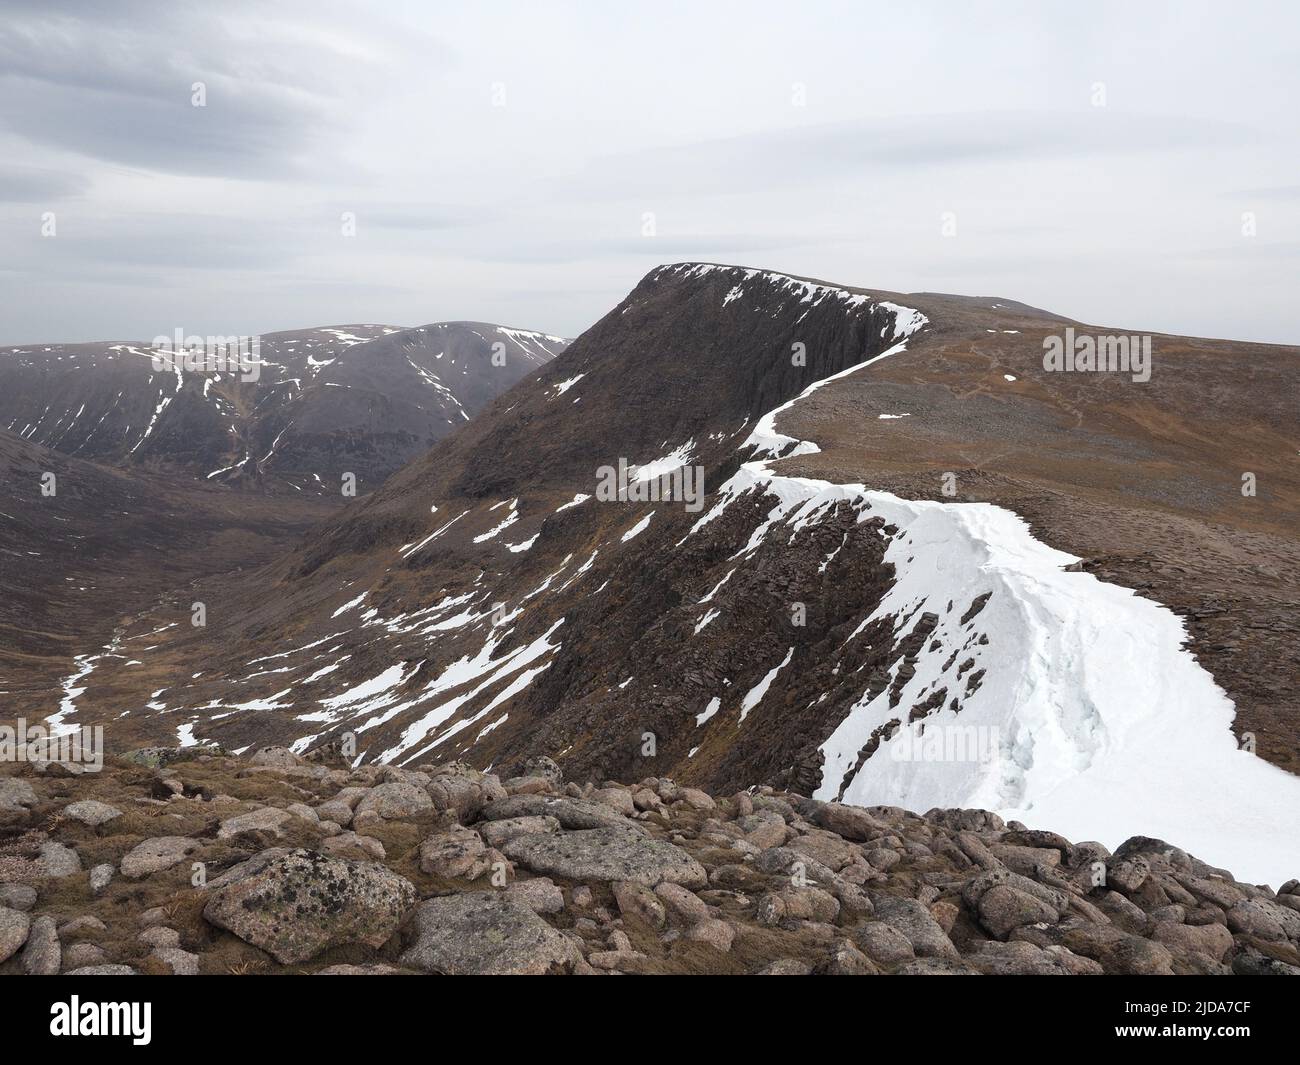 Looking down An Garbh Coire, across the Lairig Ghru with Ben Macdui in the background. The Angels Peak, Sgor an Lochain Uaine in the middle right. Stock Photo